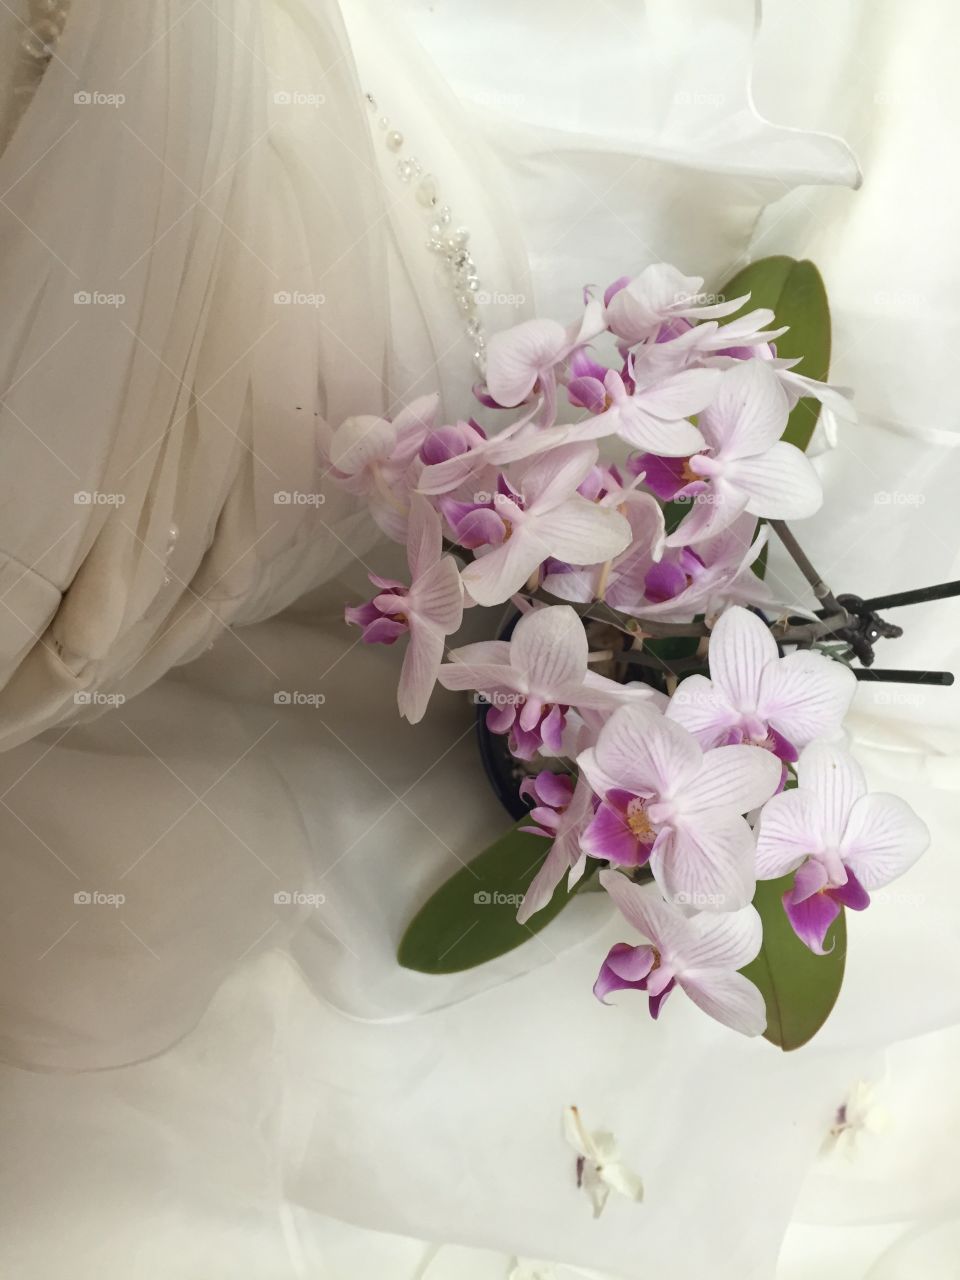 Textures and details of my wedding gown and my orchid bouquet on my anniversary 1 year later 